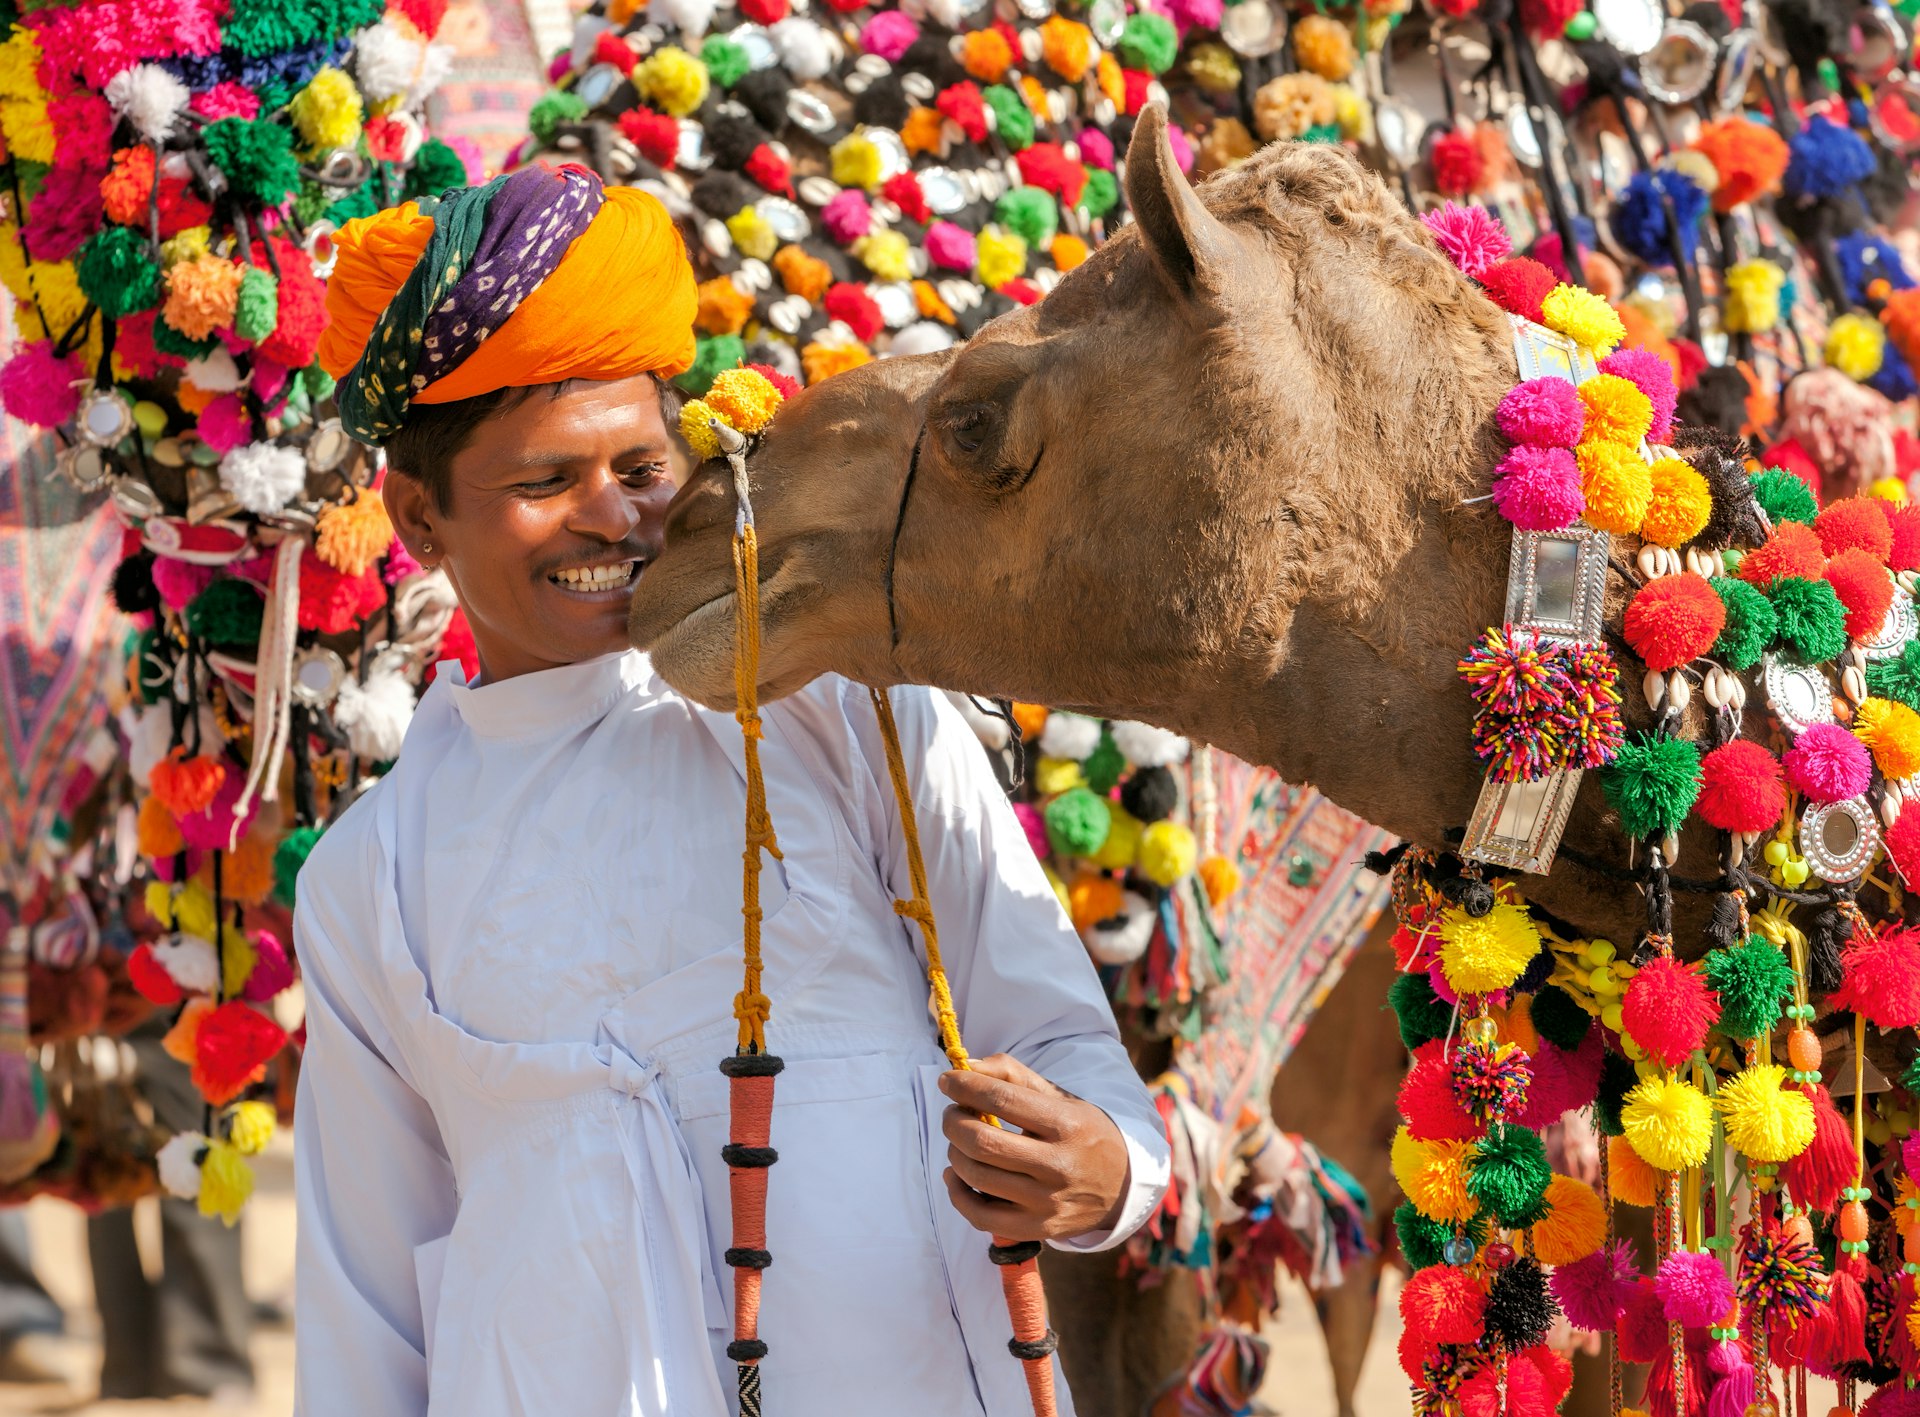 A man in a turban smiles as a heavily decorated camel pushes his nose towards his face